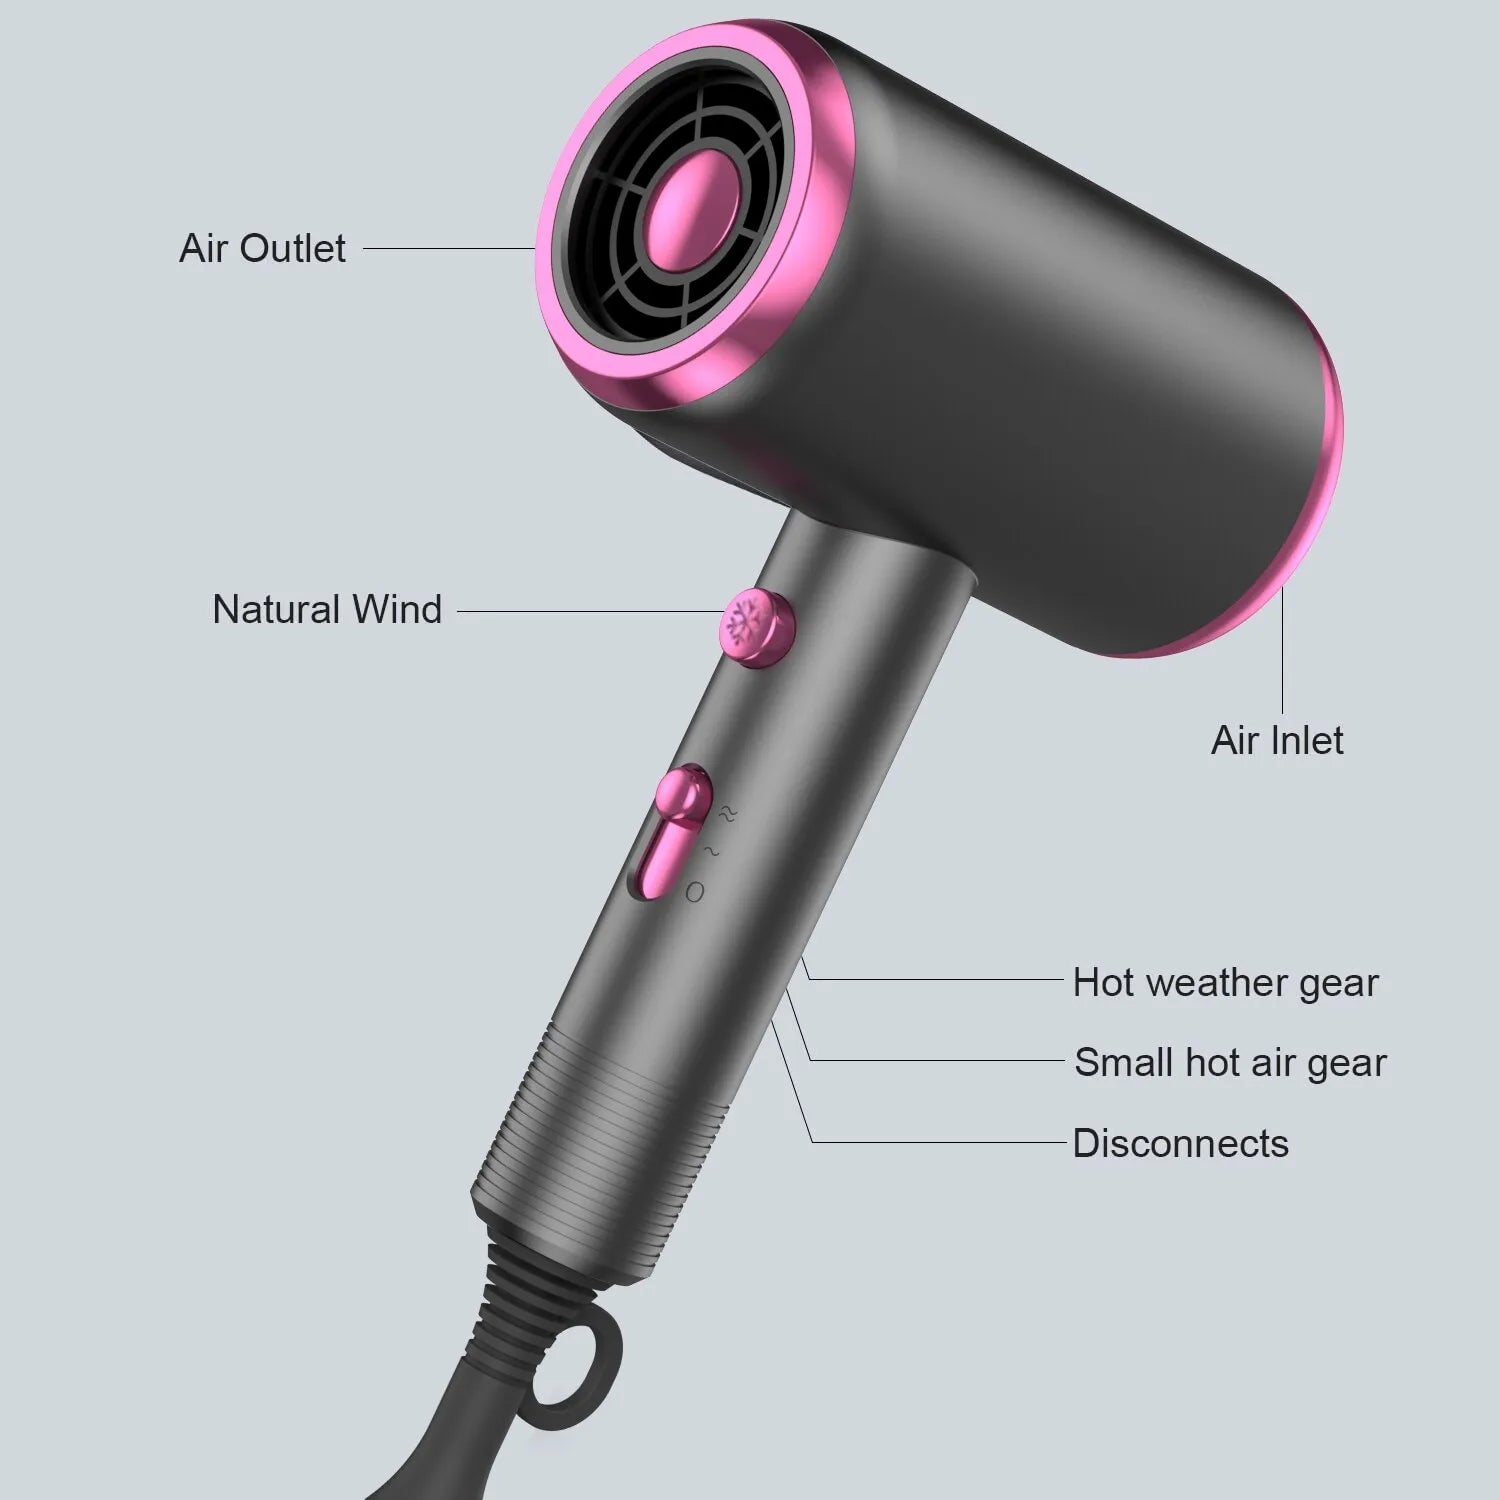 Ionic Hair Dryer, 1800W Blow Dryer with Diffuser & Comb Brush